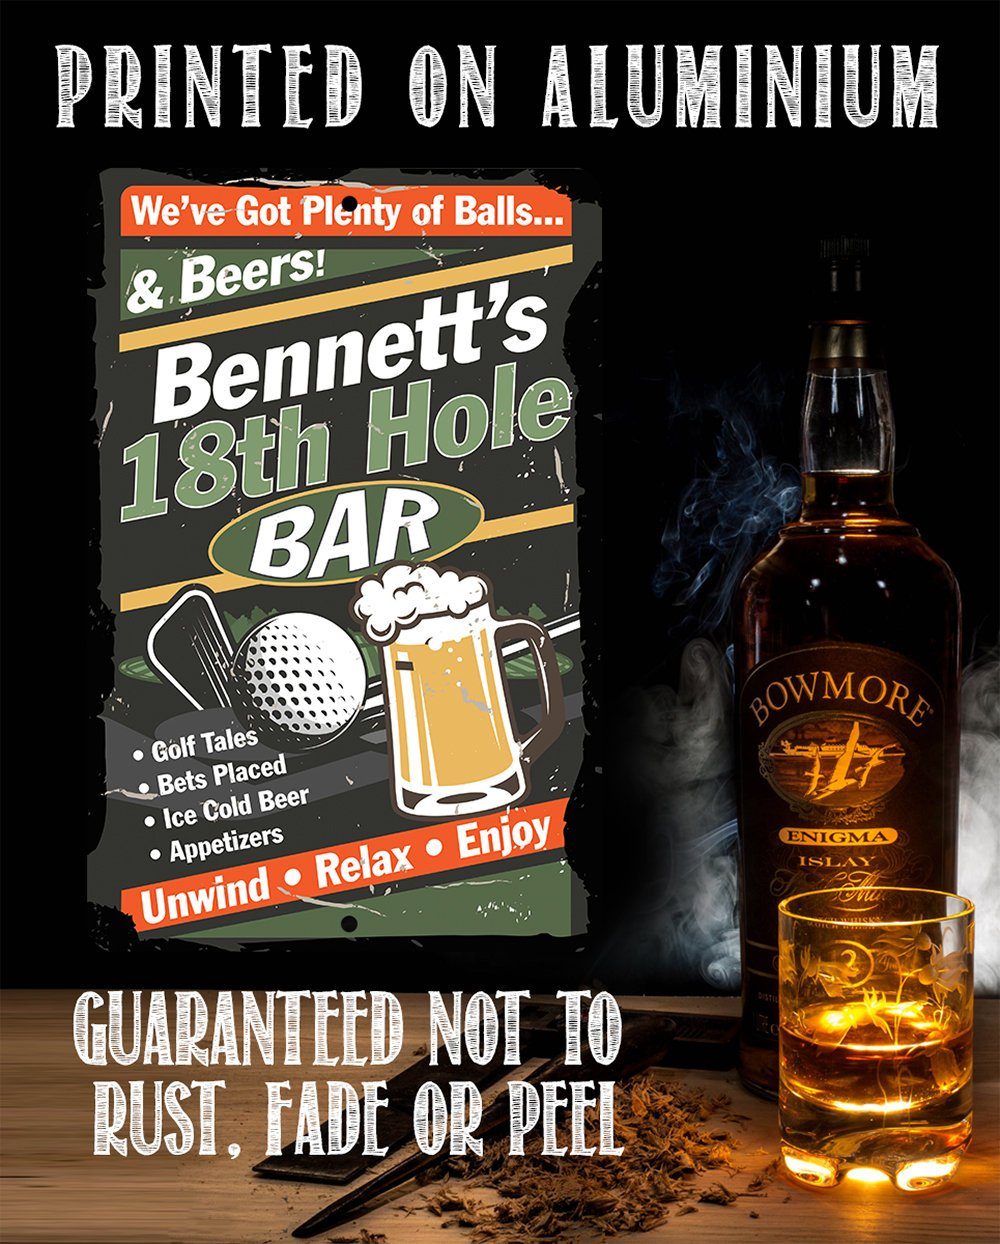 Personalized - 18th Hole Golf Bar - Metal Sign | Lone Star Art.